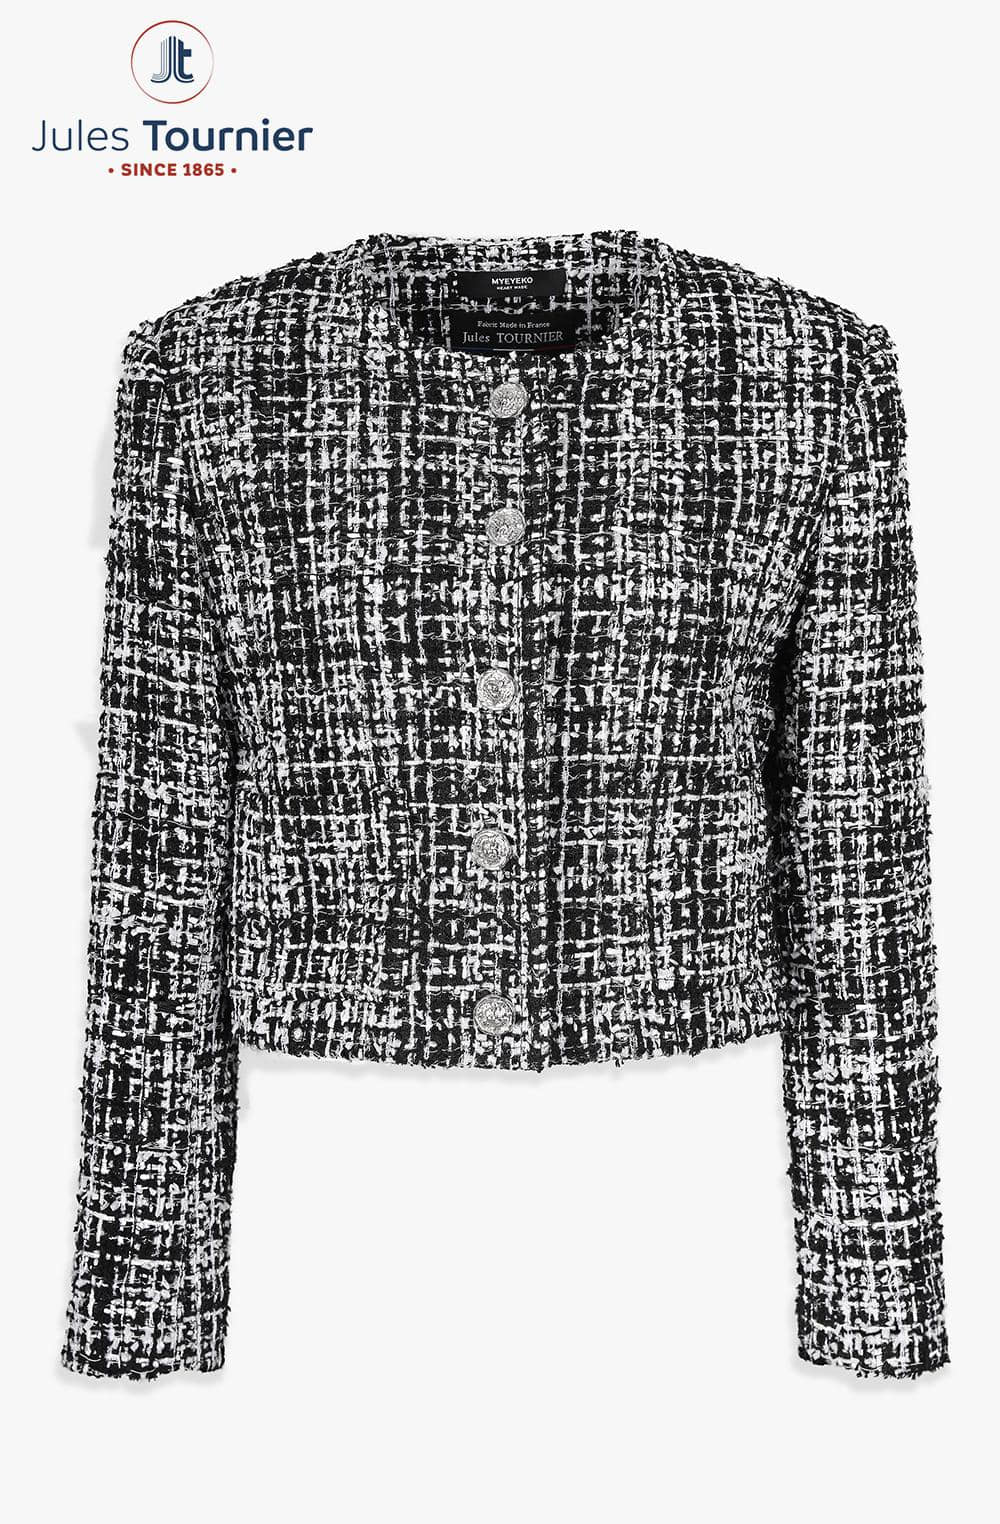 HIGH QUALITY LINE - Classic Tweed Jacket (Fabric by, Jules TOURNIER Made in France)